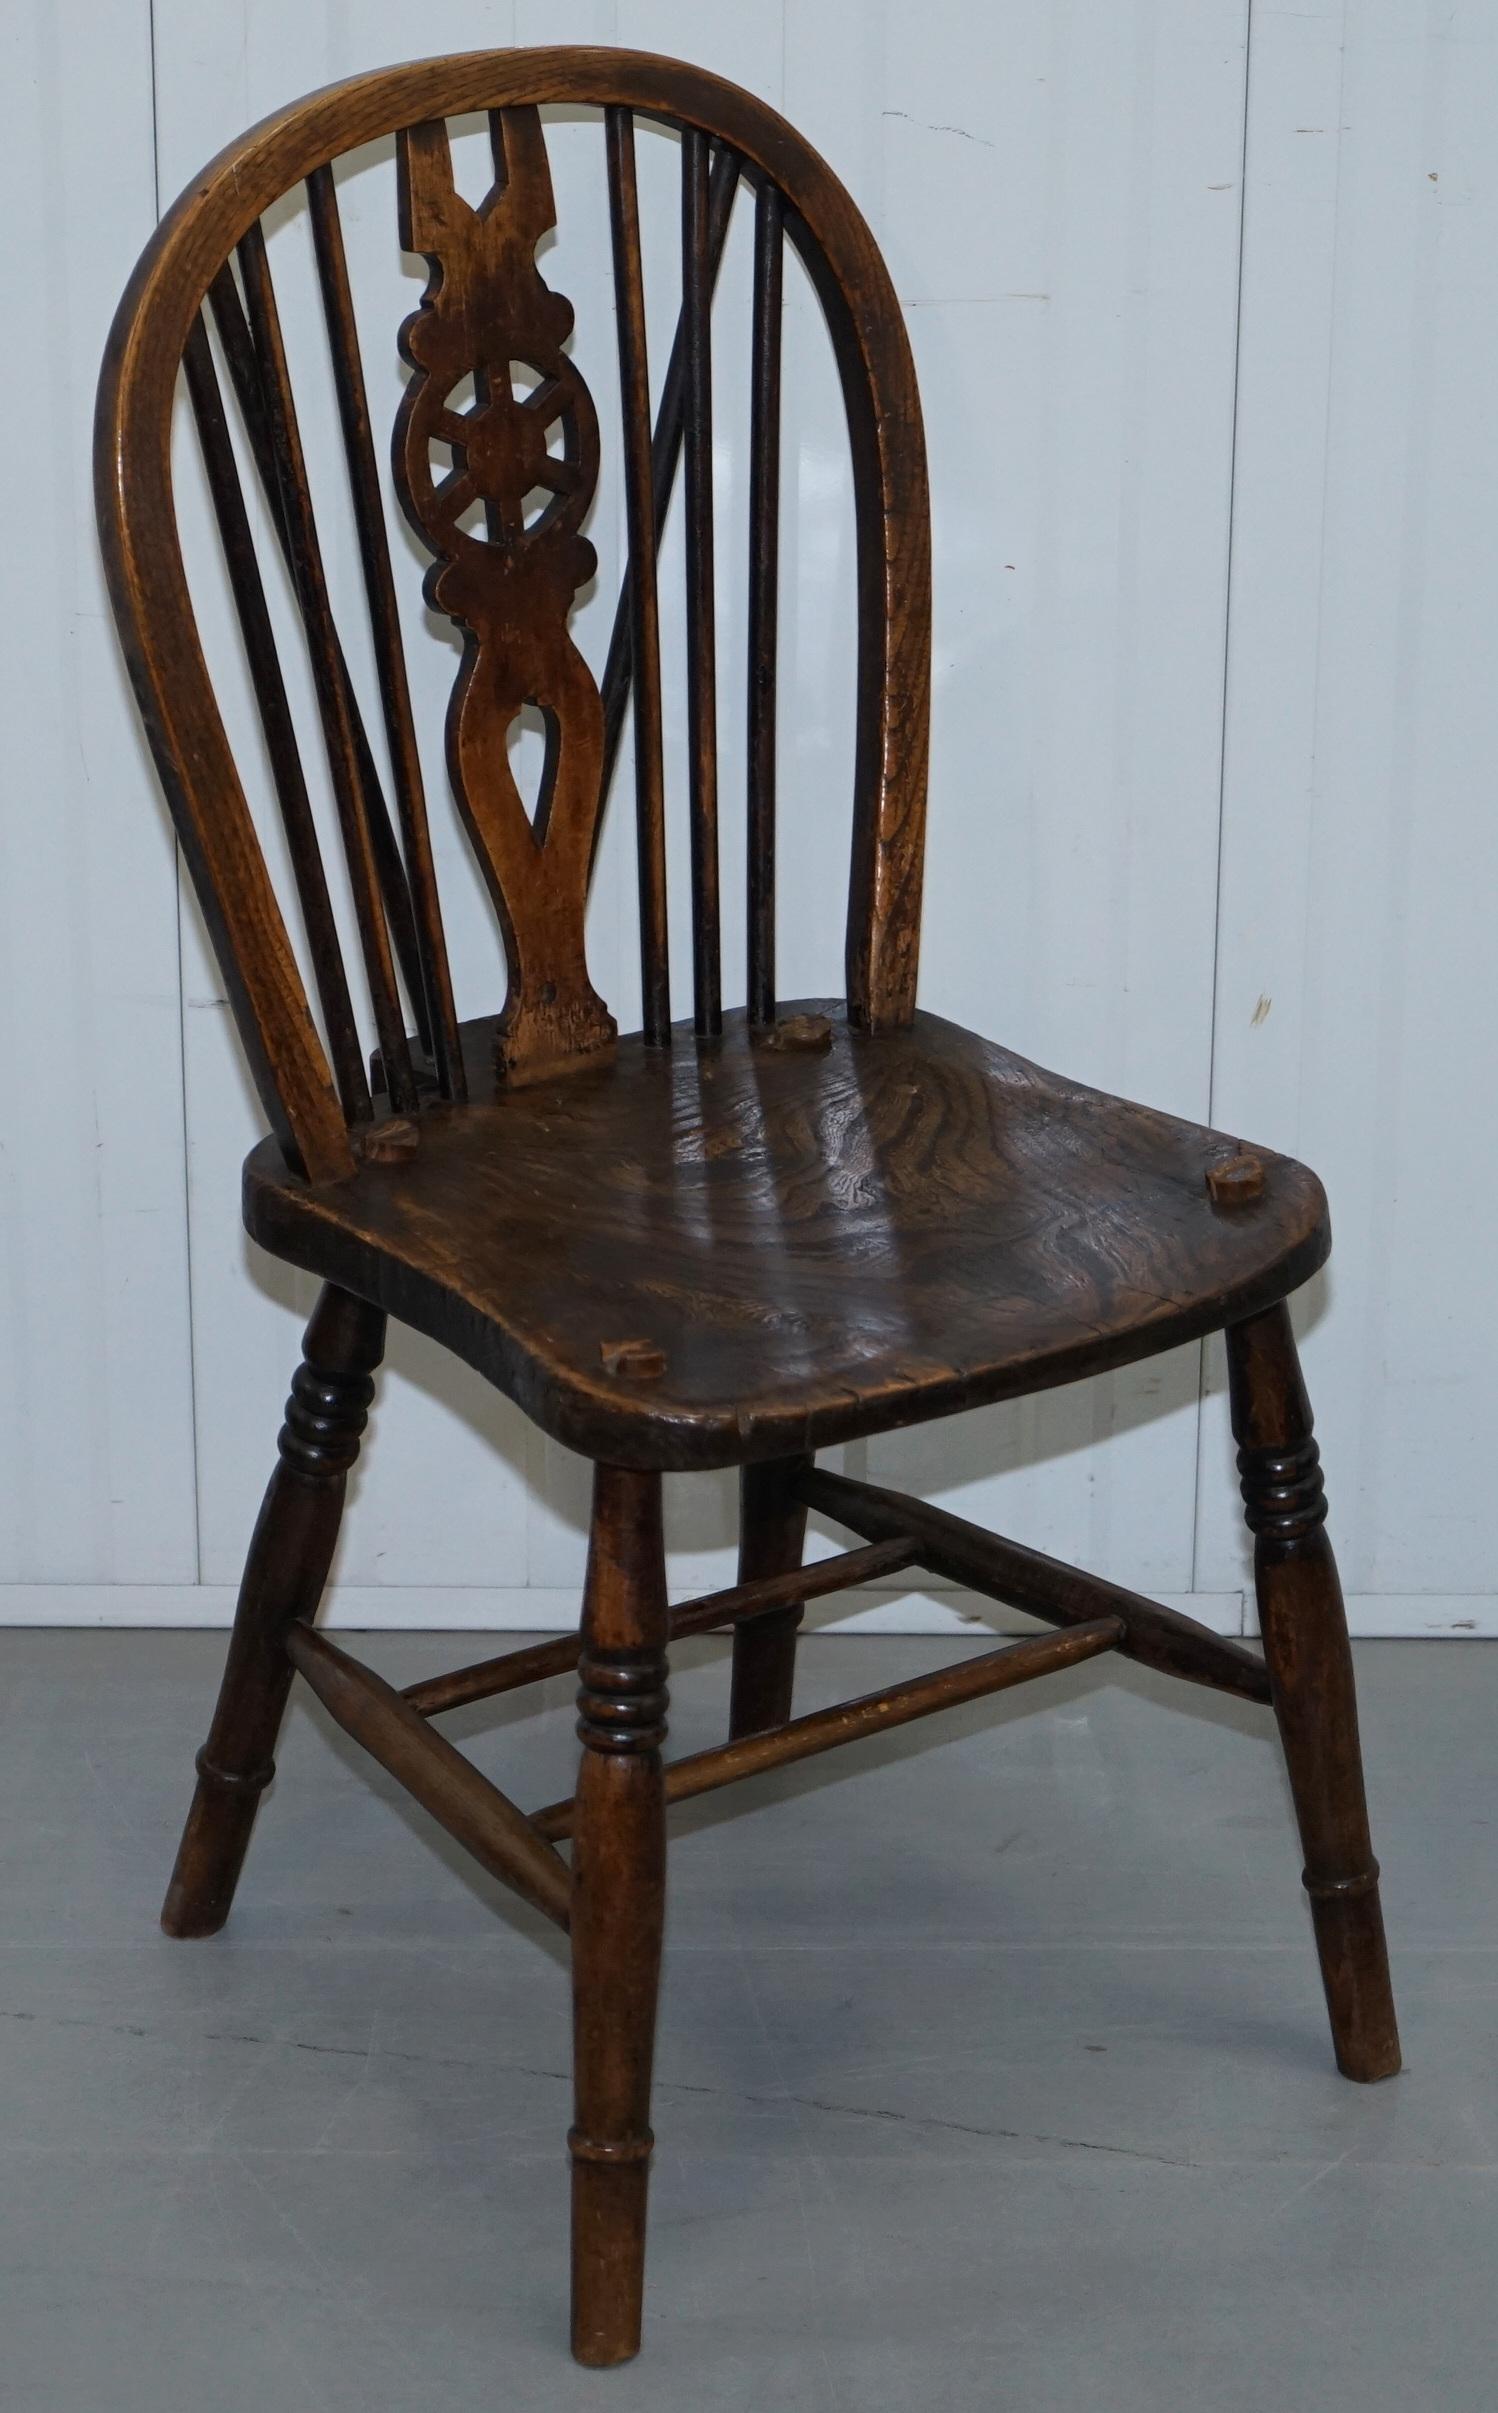 We are delighted to offer for sale very rare set of 6 original early Victorian elm windsor hoop back dining chairs, circa 1840

Its very rare to find a set of six, The chairs are hand carved from solid slabs of elm, the seat bases each have a